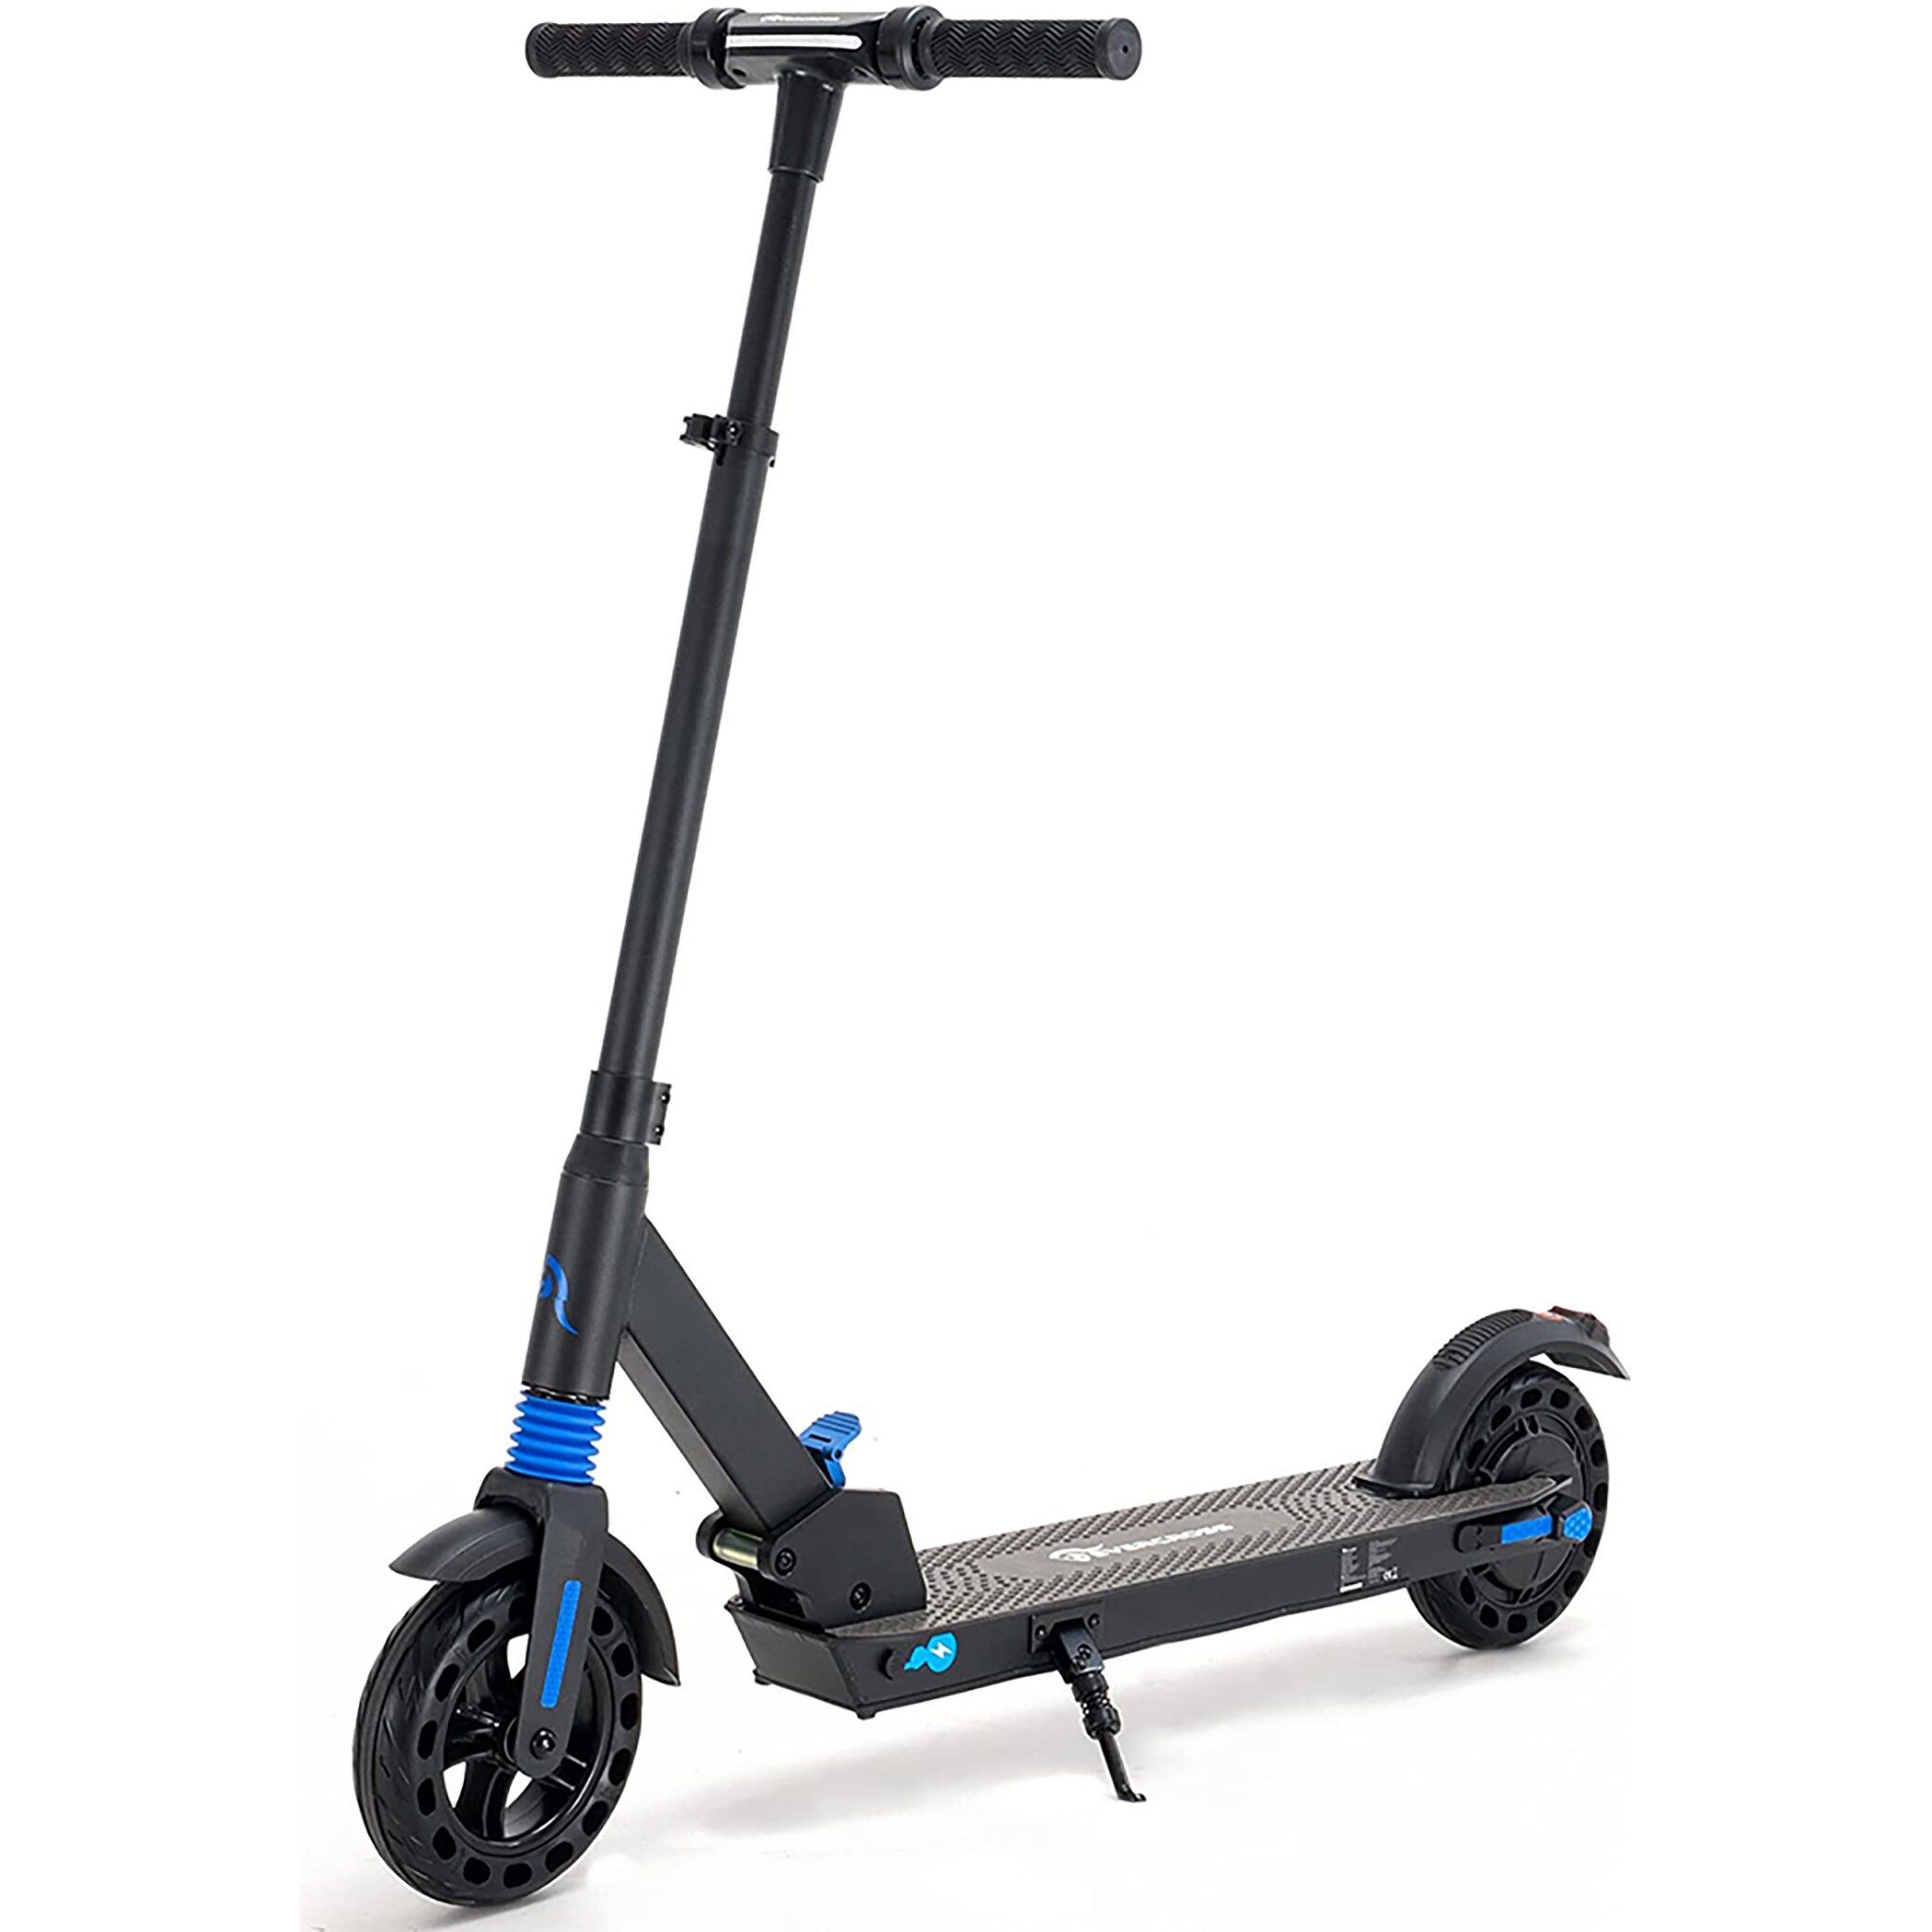 EVERCROSS Ev08S Folding Electric Scooter Adult, Max Speed 15Mph, with 3 Modes and Dual Braking in the Scooters at Lowes.com